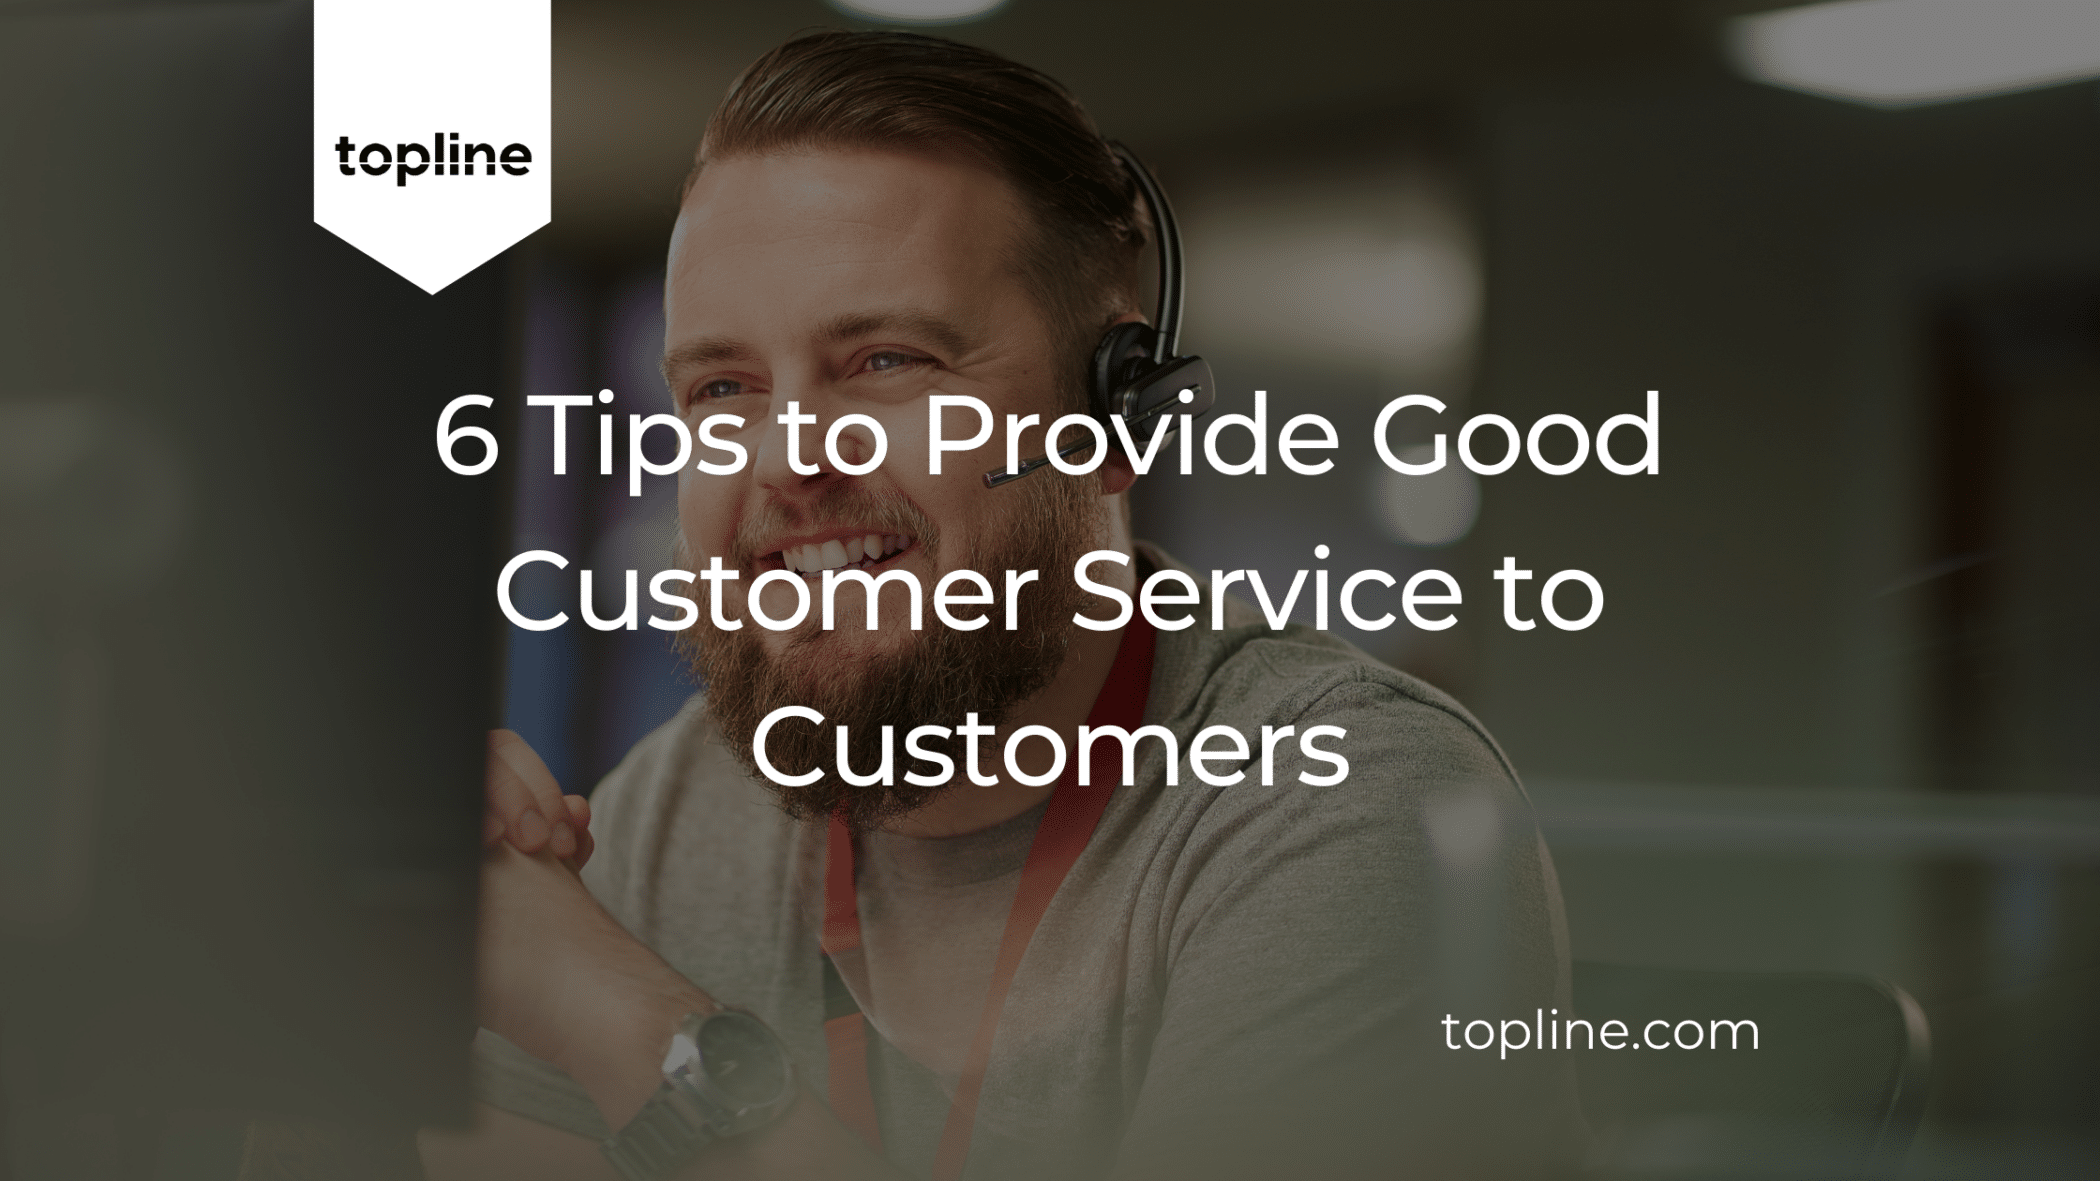 6 Tips to Provide Good Customer Service to your Customers